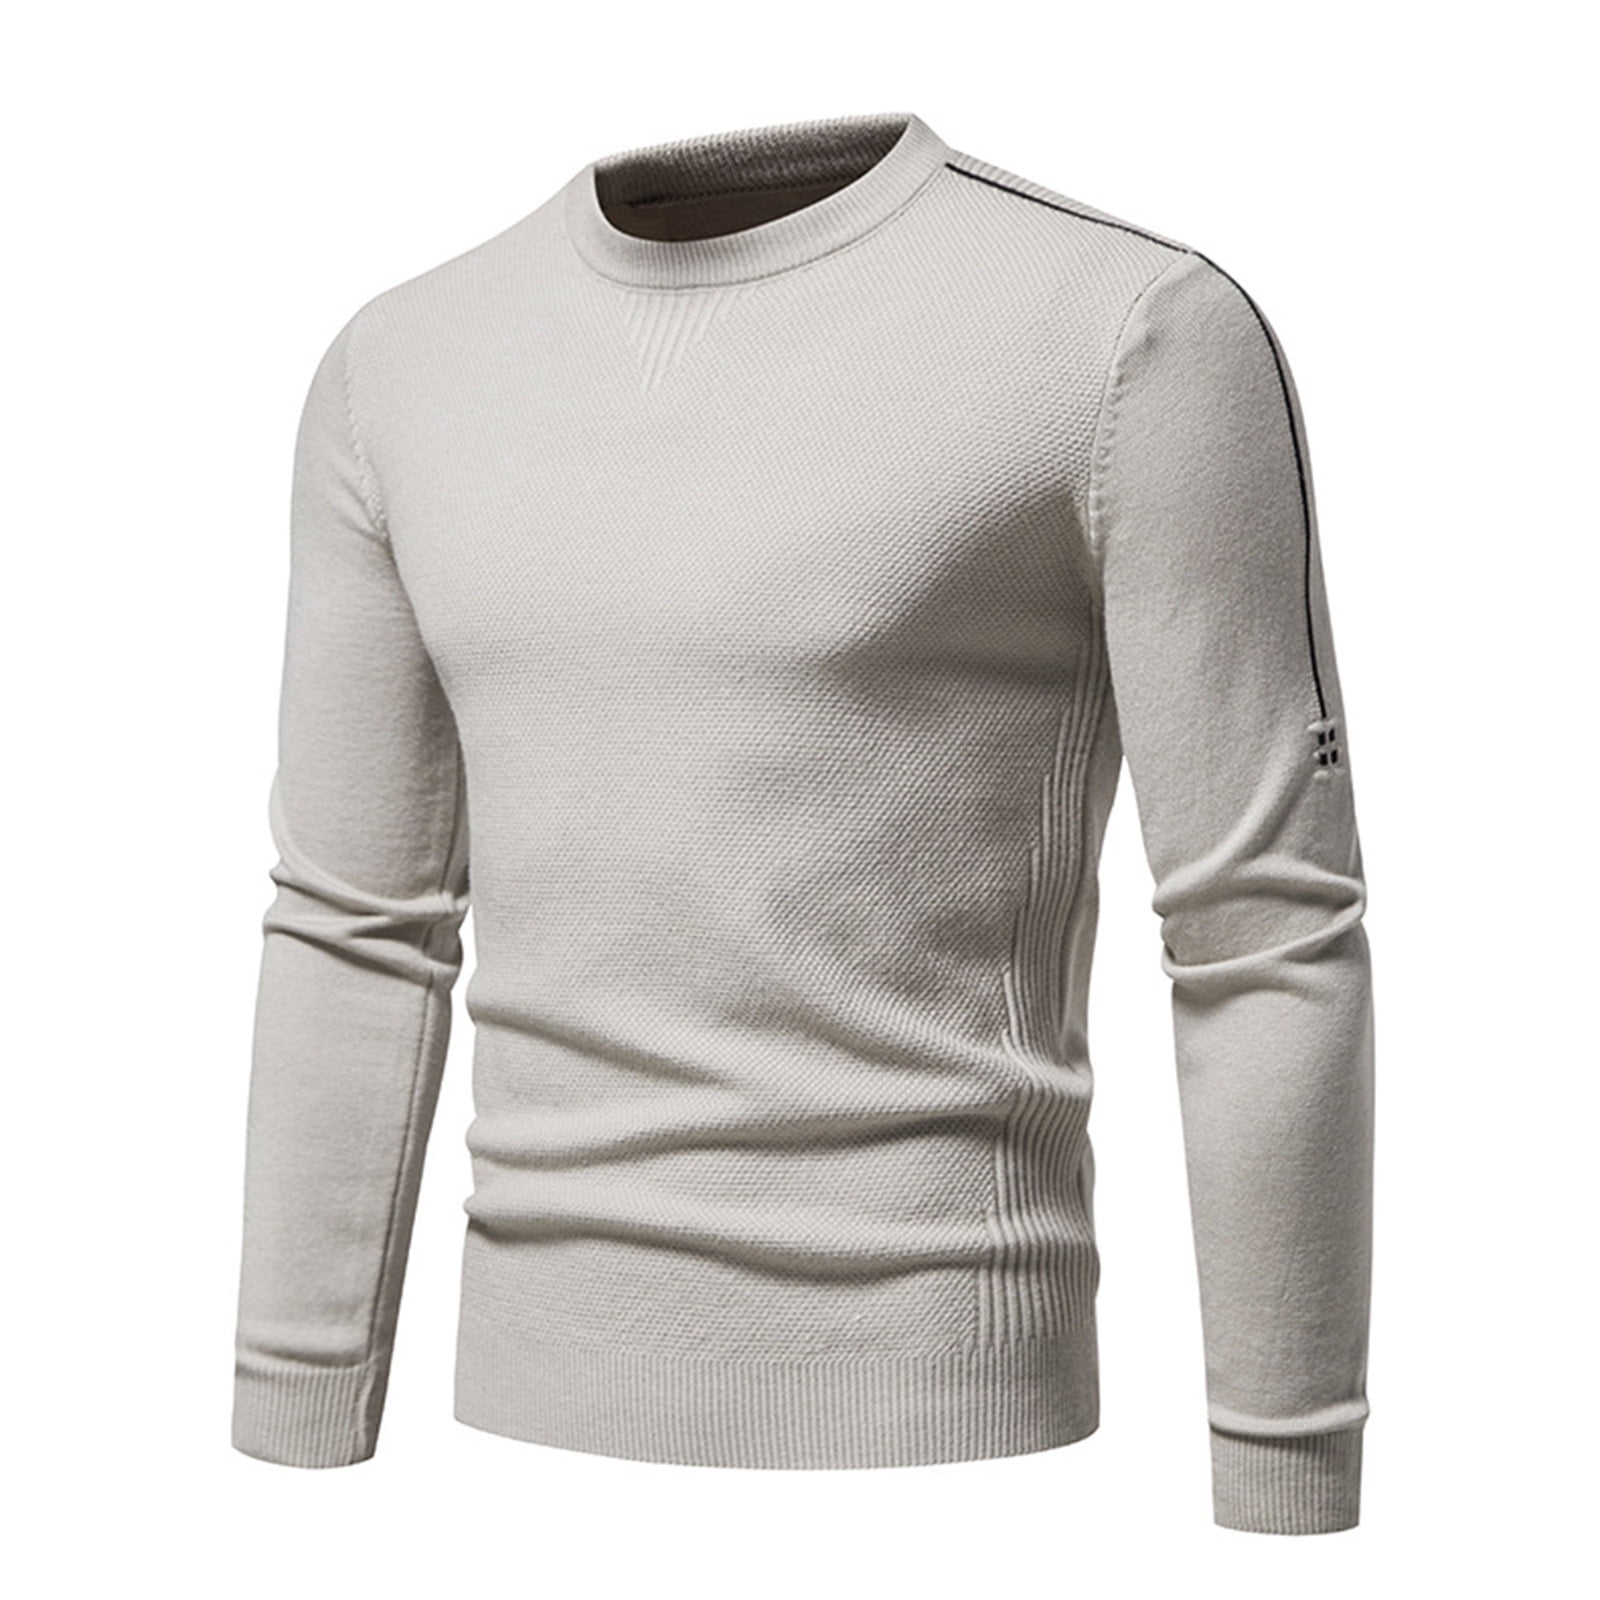 Mens Crewneck Sweater Men's Autumn New Men's Knitwear Solid Color Slim Fit  Round Neck Pullover Long Sleeve Sweater Korean Version Bottoming Shirt